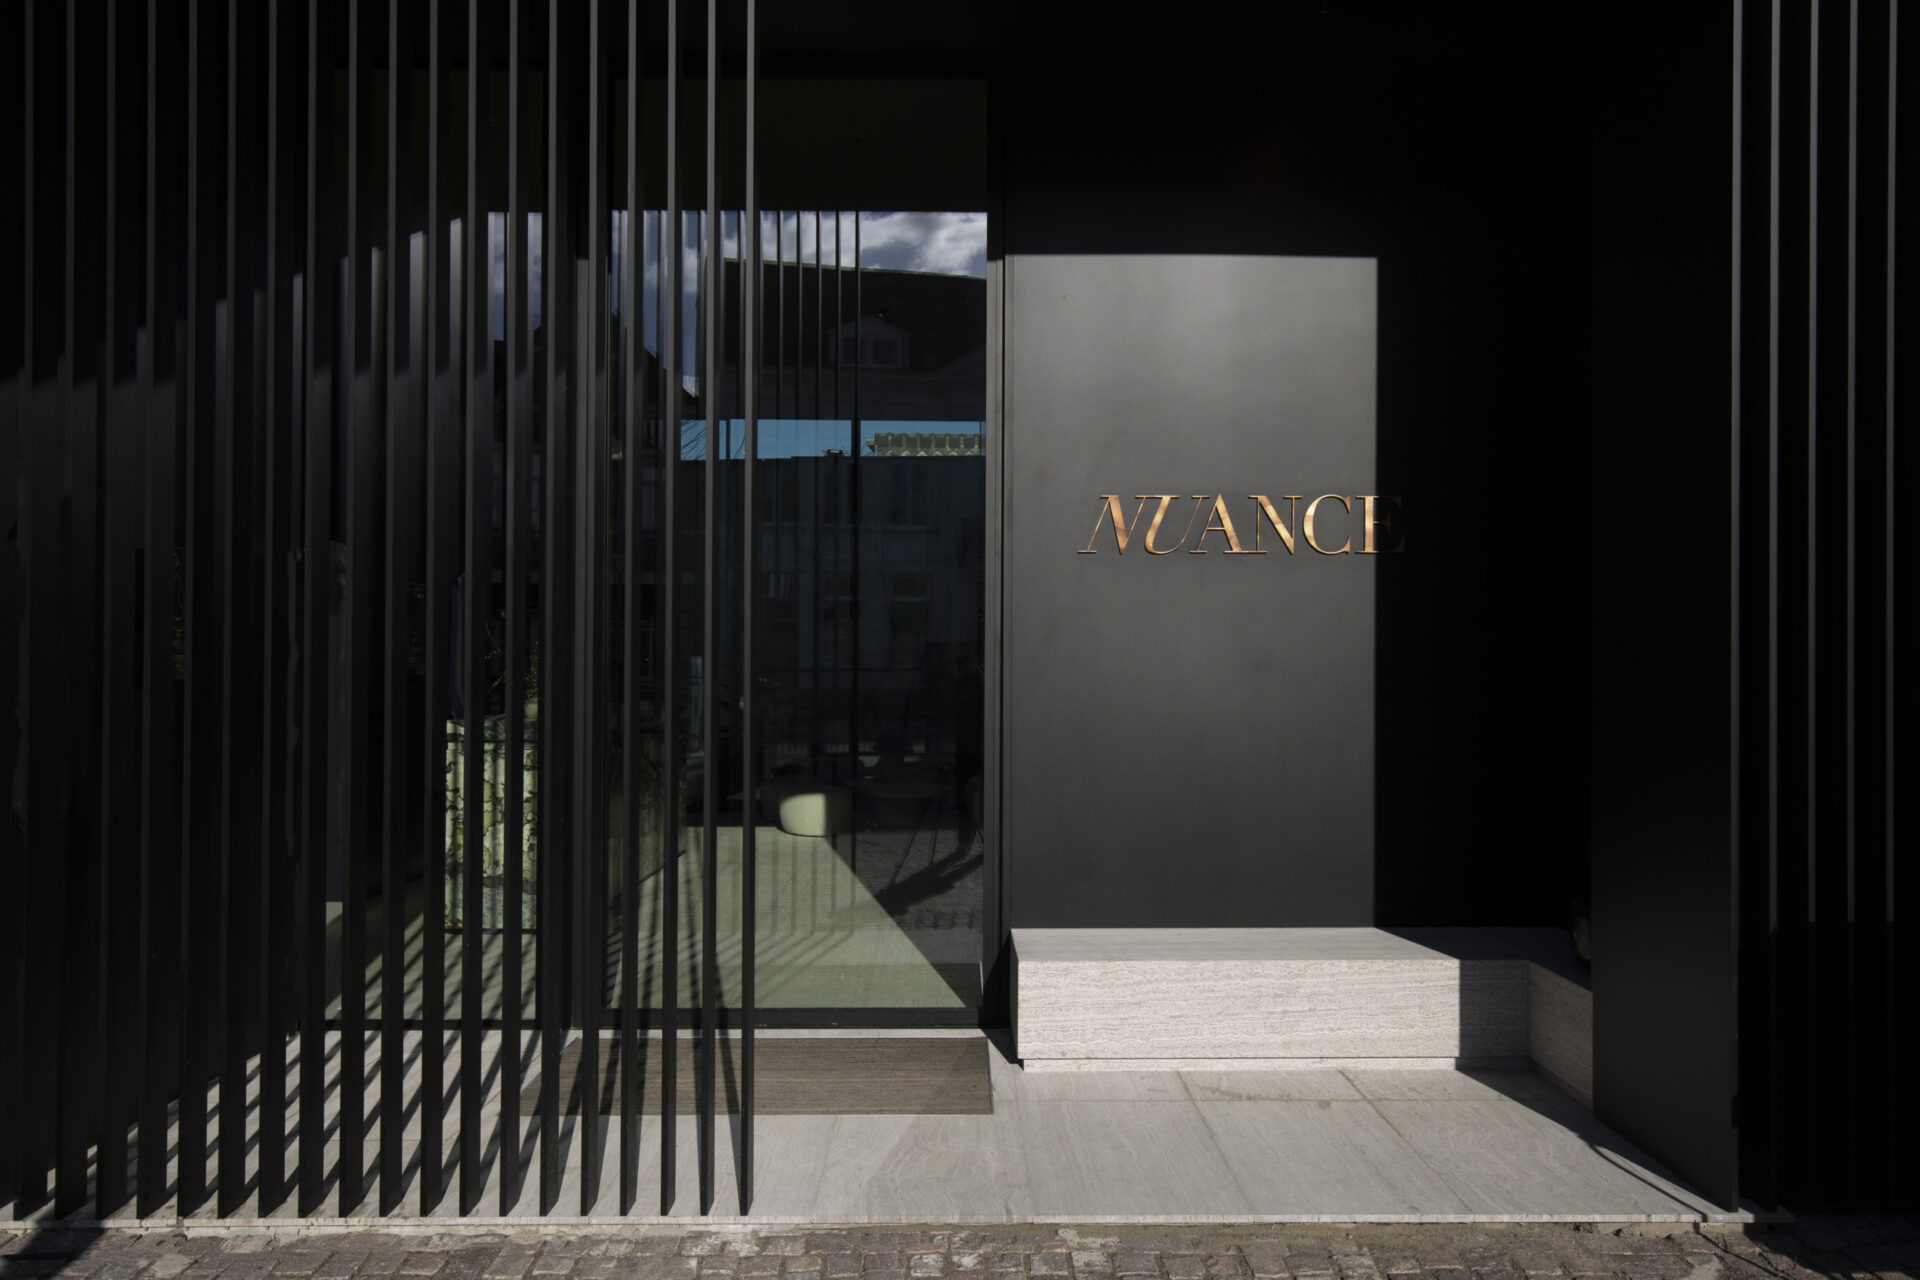 Nuance | Duffel - outside entree. Window and black wall with golden letters.